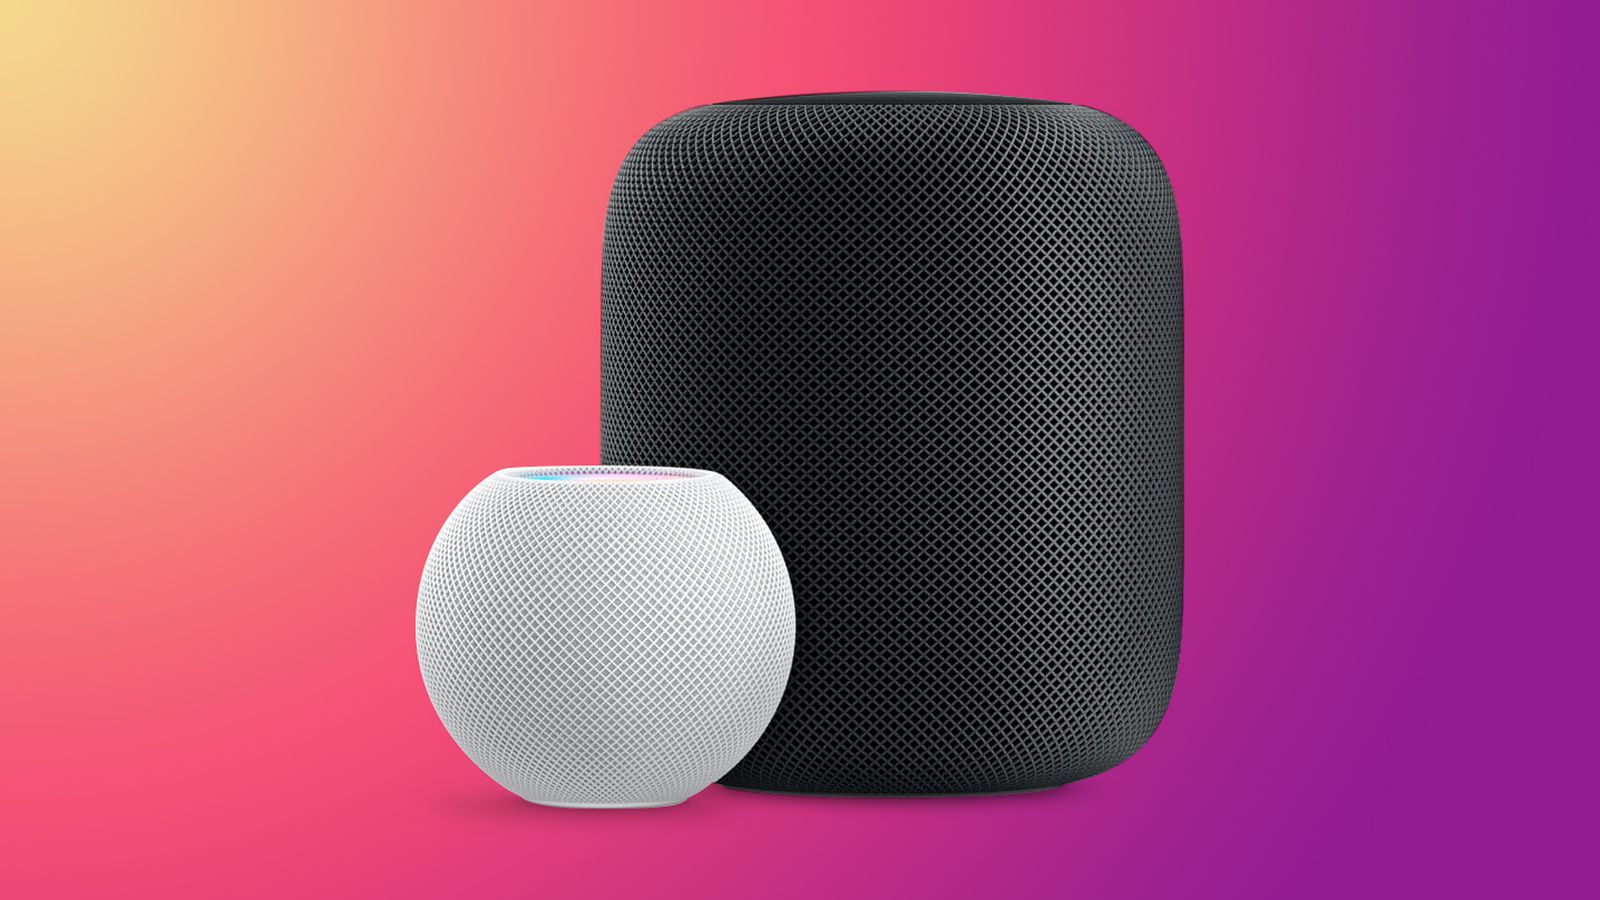 How to factory reset a Homepod or Homepod mini?